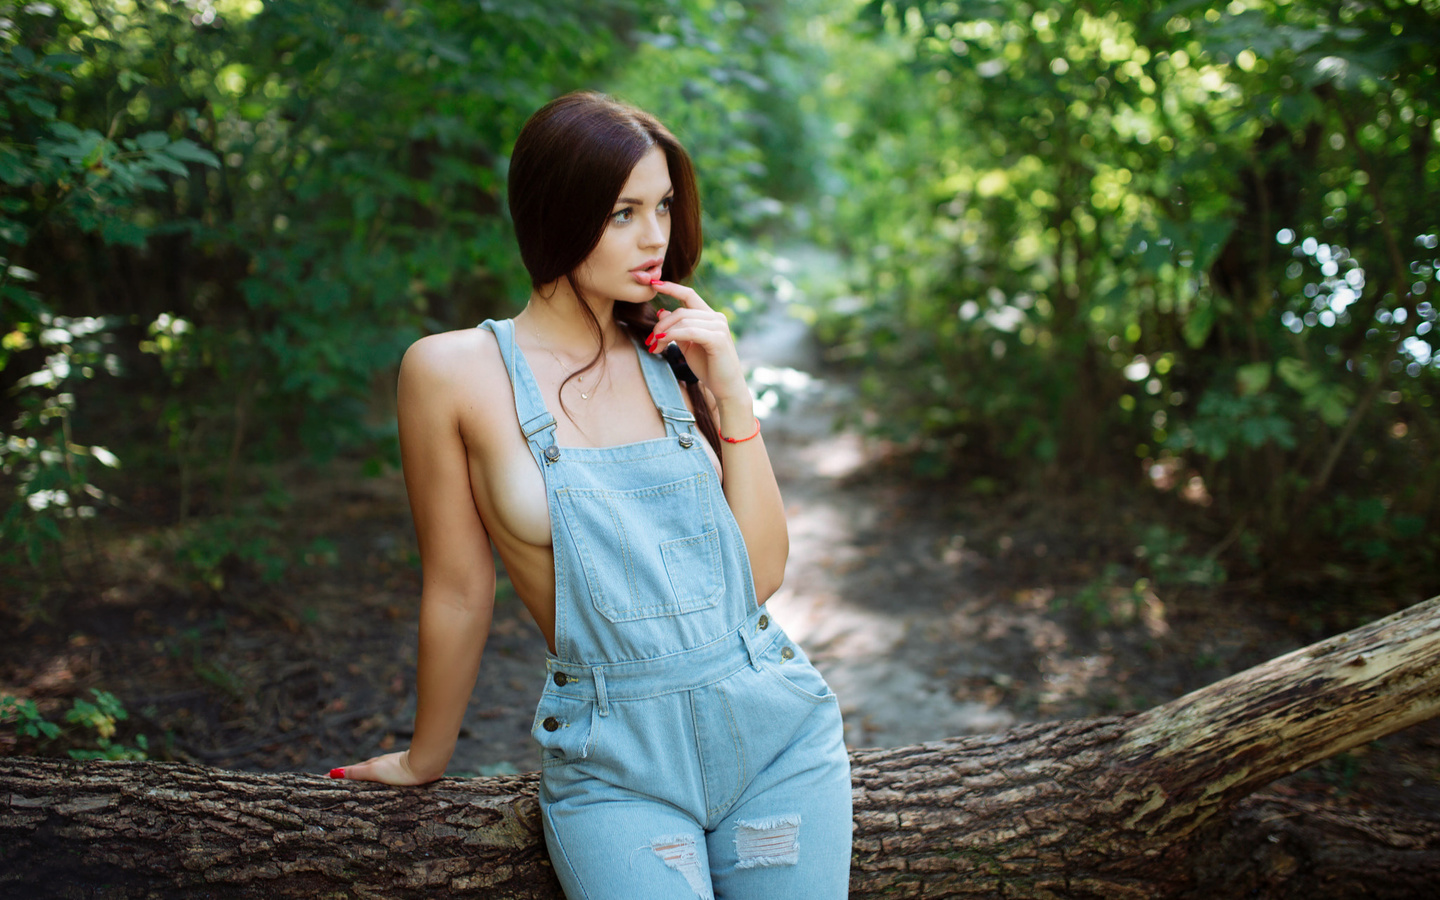 women, overalls, red nails, boobs, no bra, women outdoors, finger on lips, ribs, looking away, torn clothes